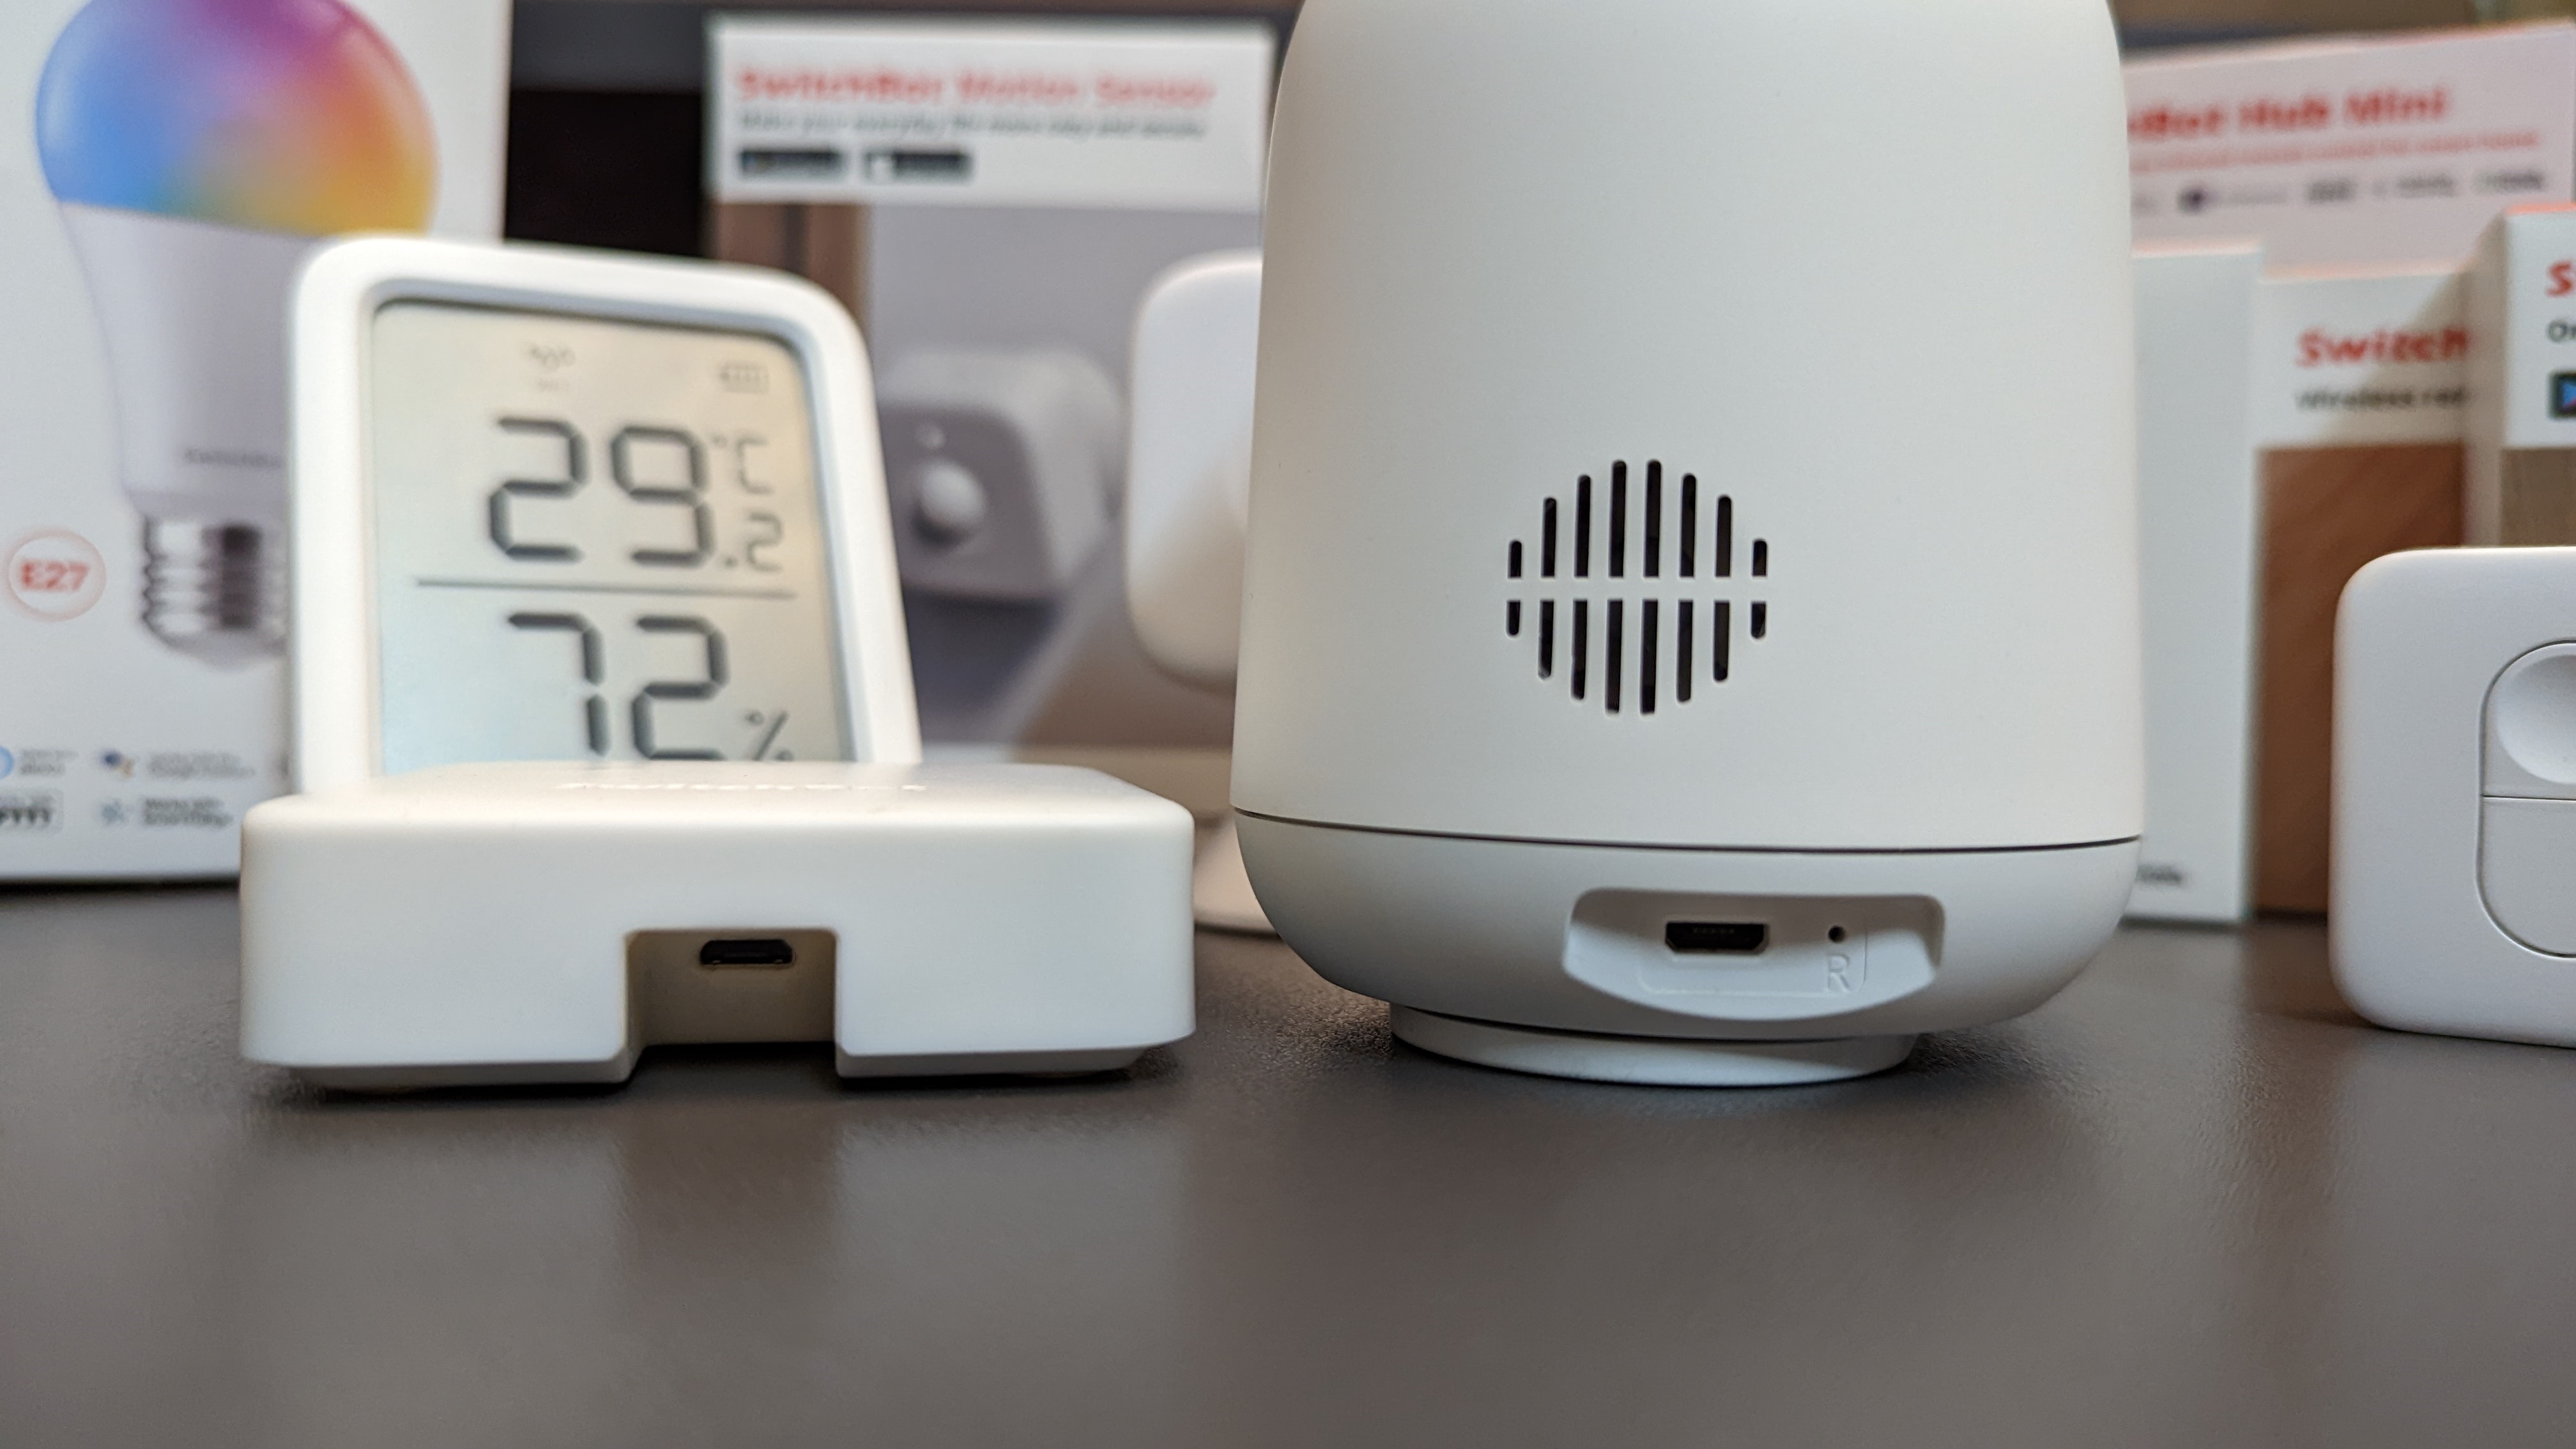 SwitchBot smart home products showcasing Micro-USB ports